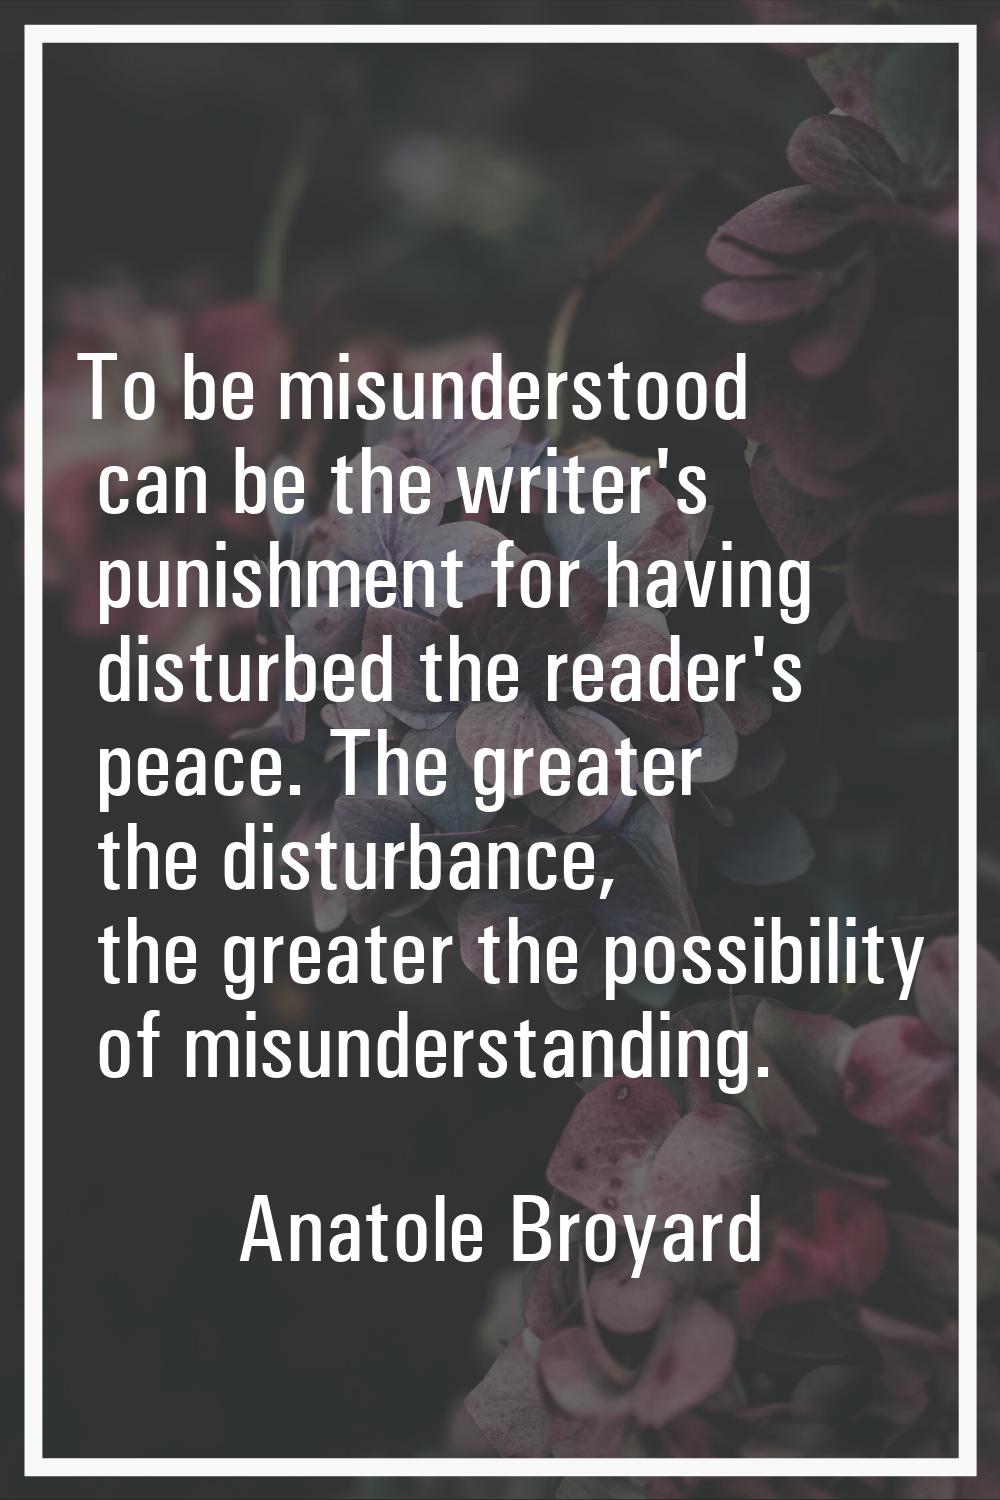 To be misunderstood can be the writer's punishment for having disturbed the reader's peace. The gre